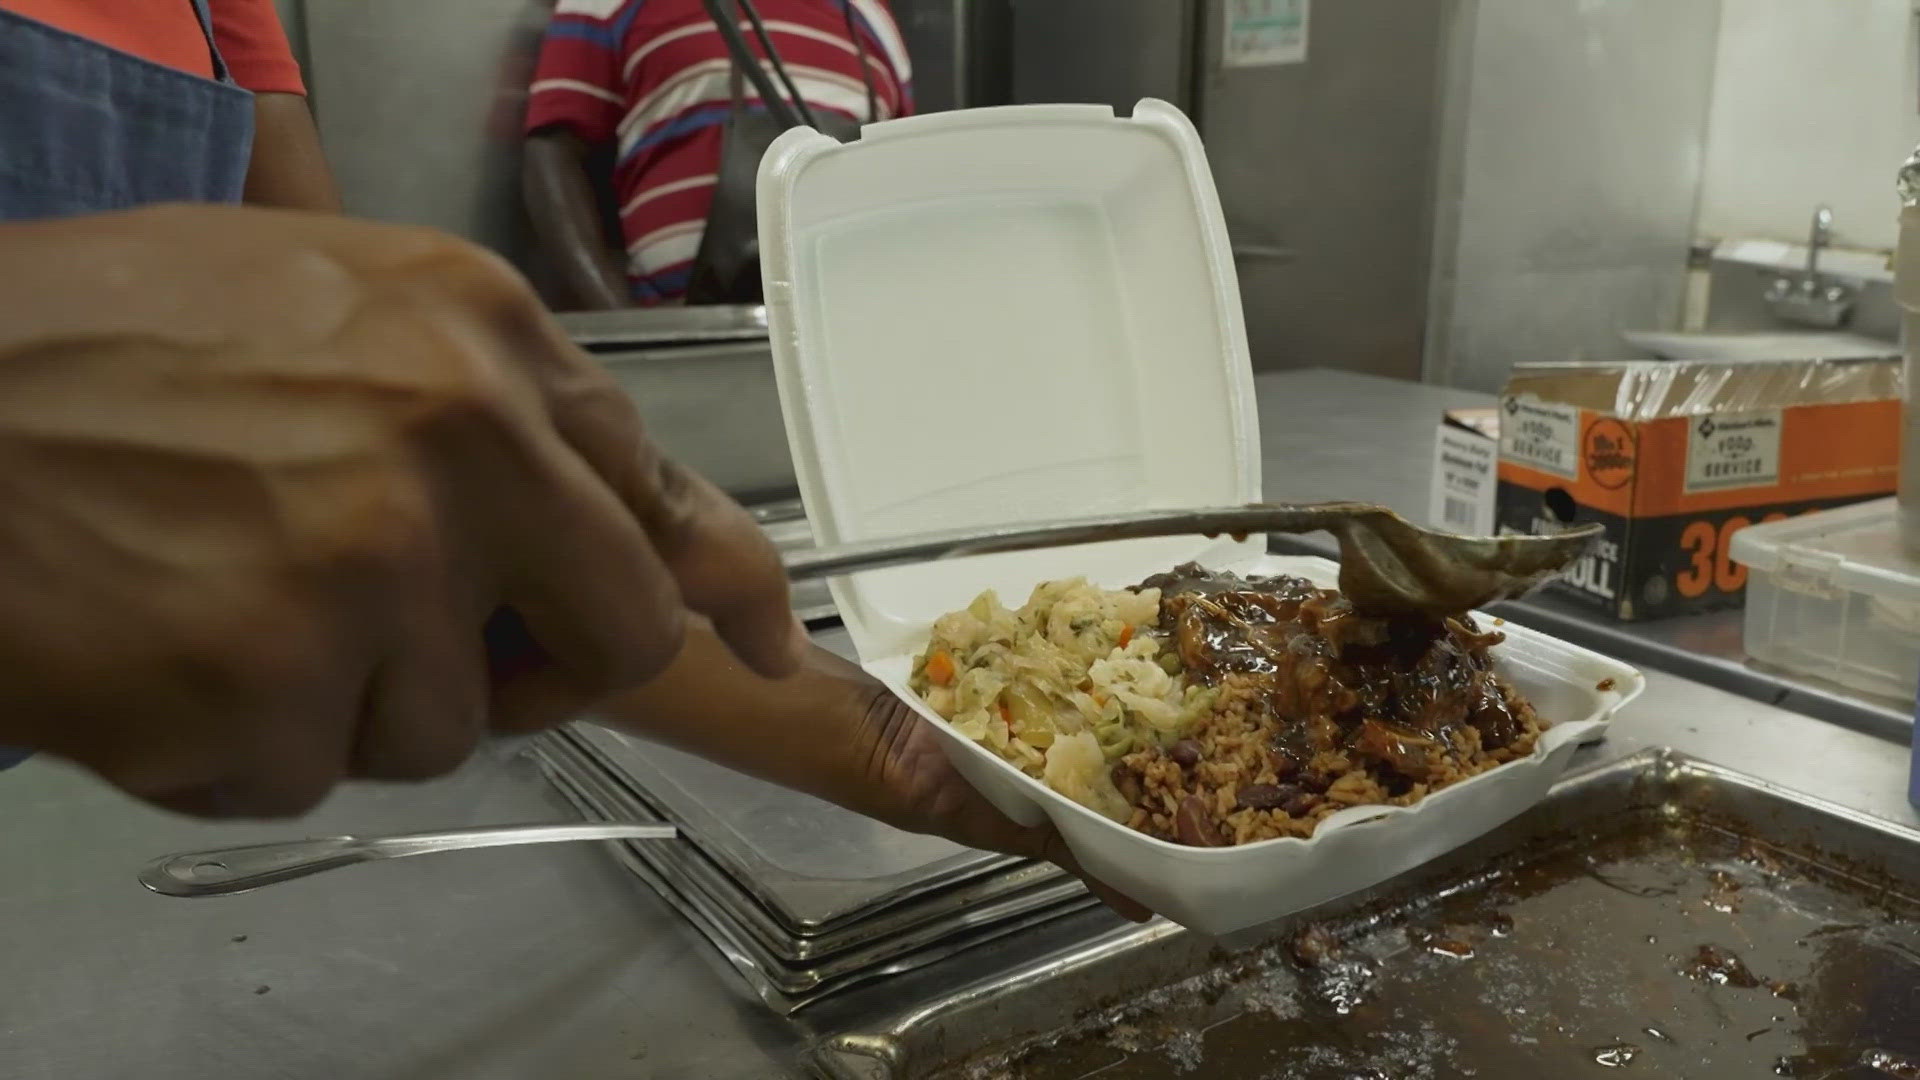 “If you don’t have money to give to someone, you can feed them,” said Matthew Graham, Elaine's Jamaican Kitchen.